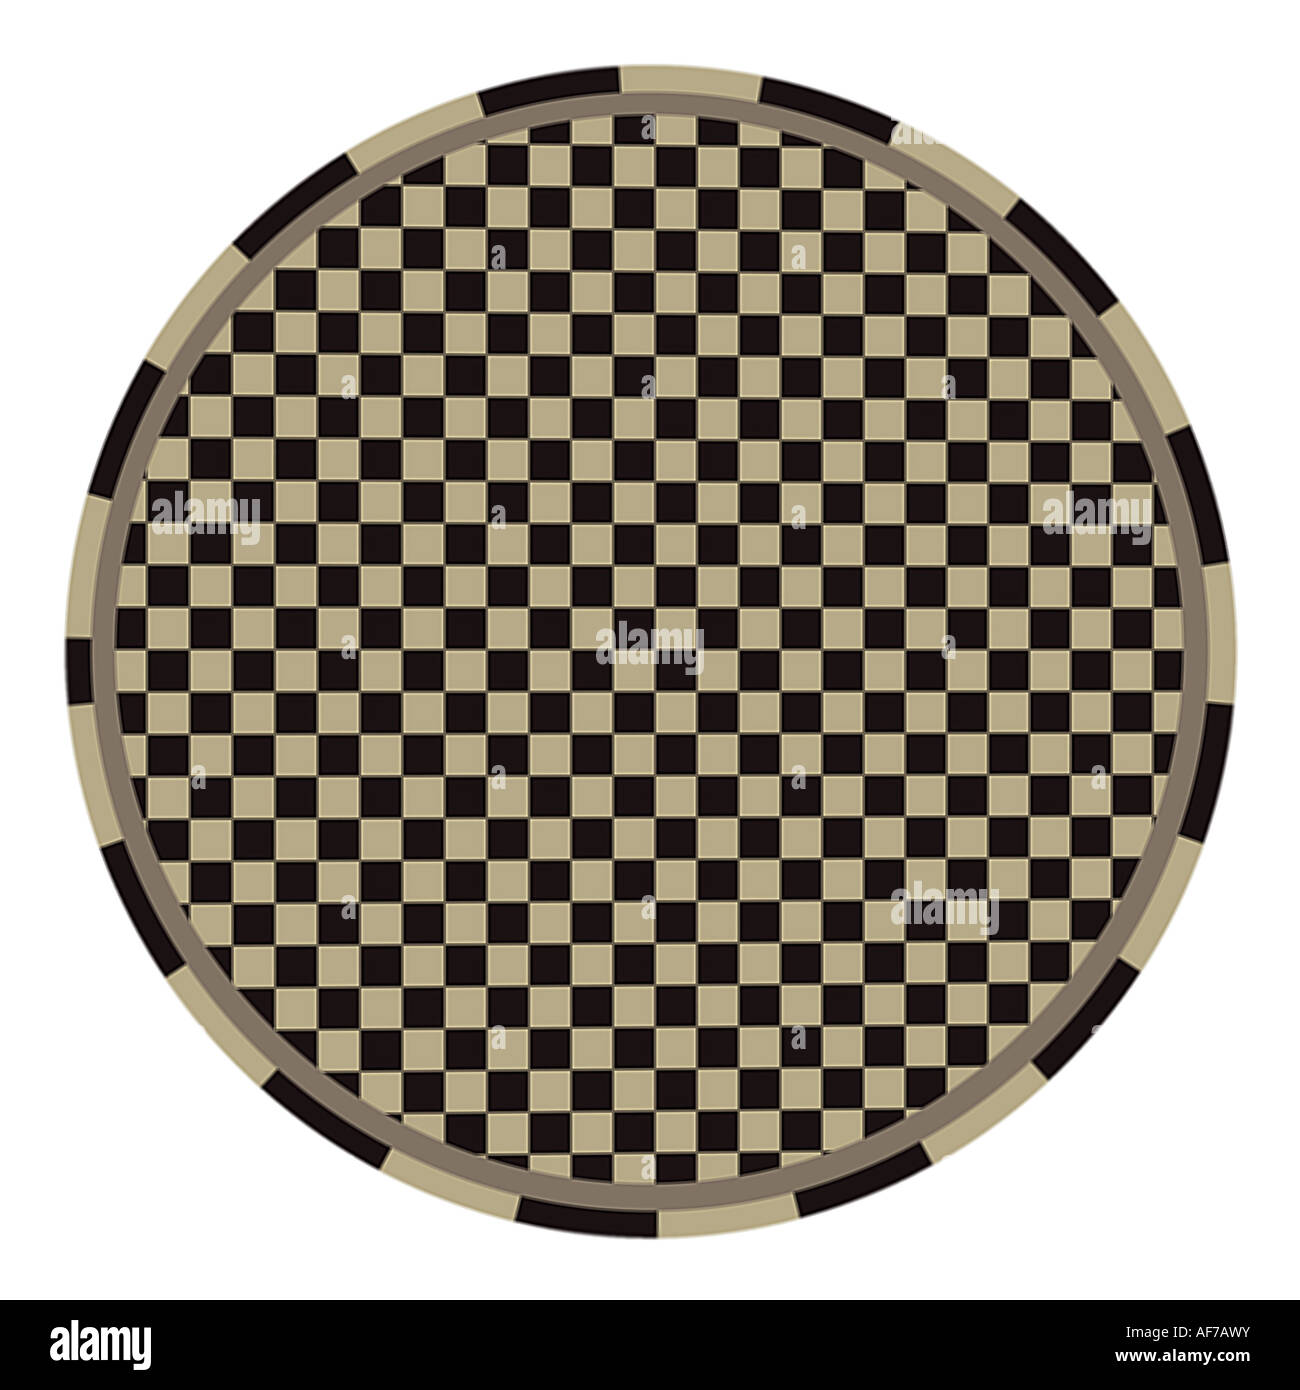 3d rendered image of a checkerboard wheel Stock Photo